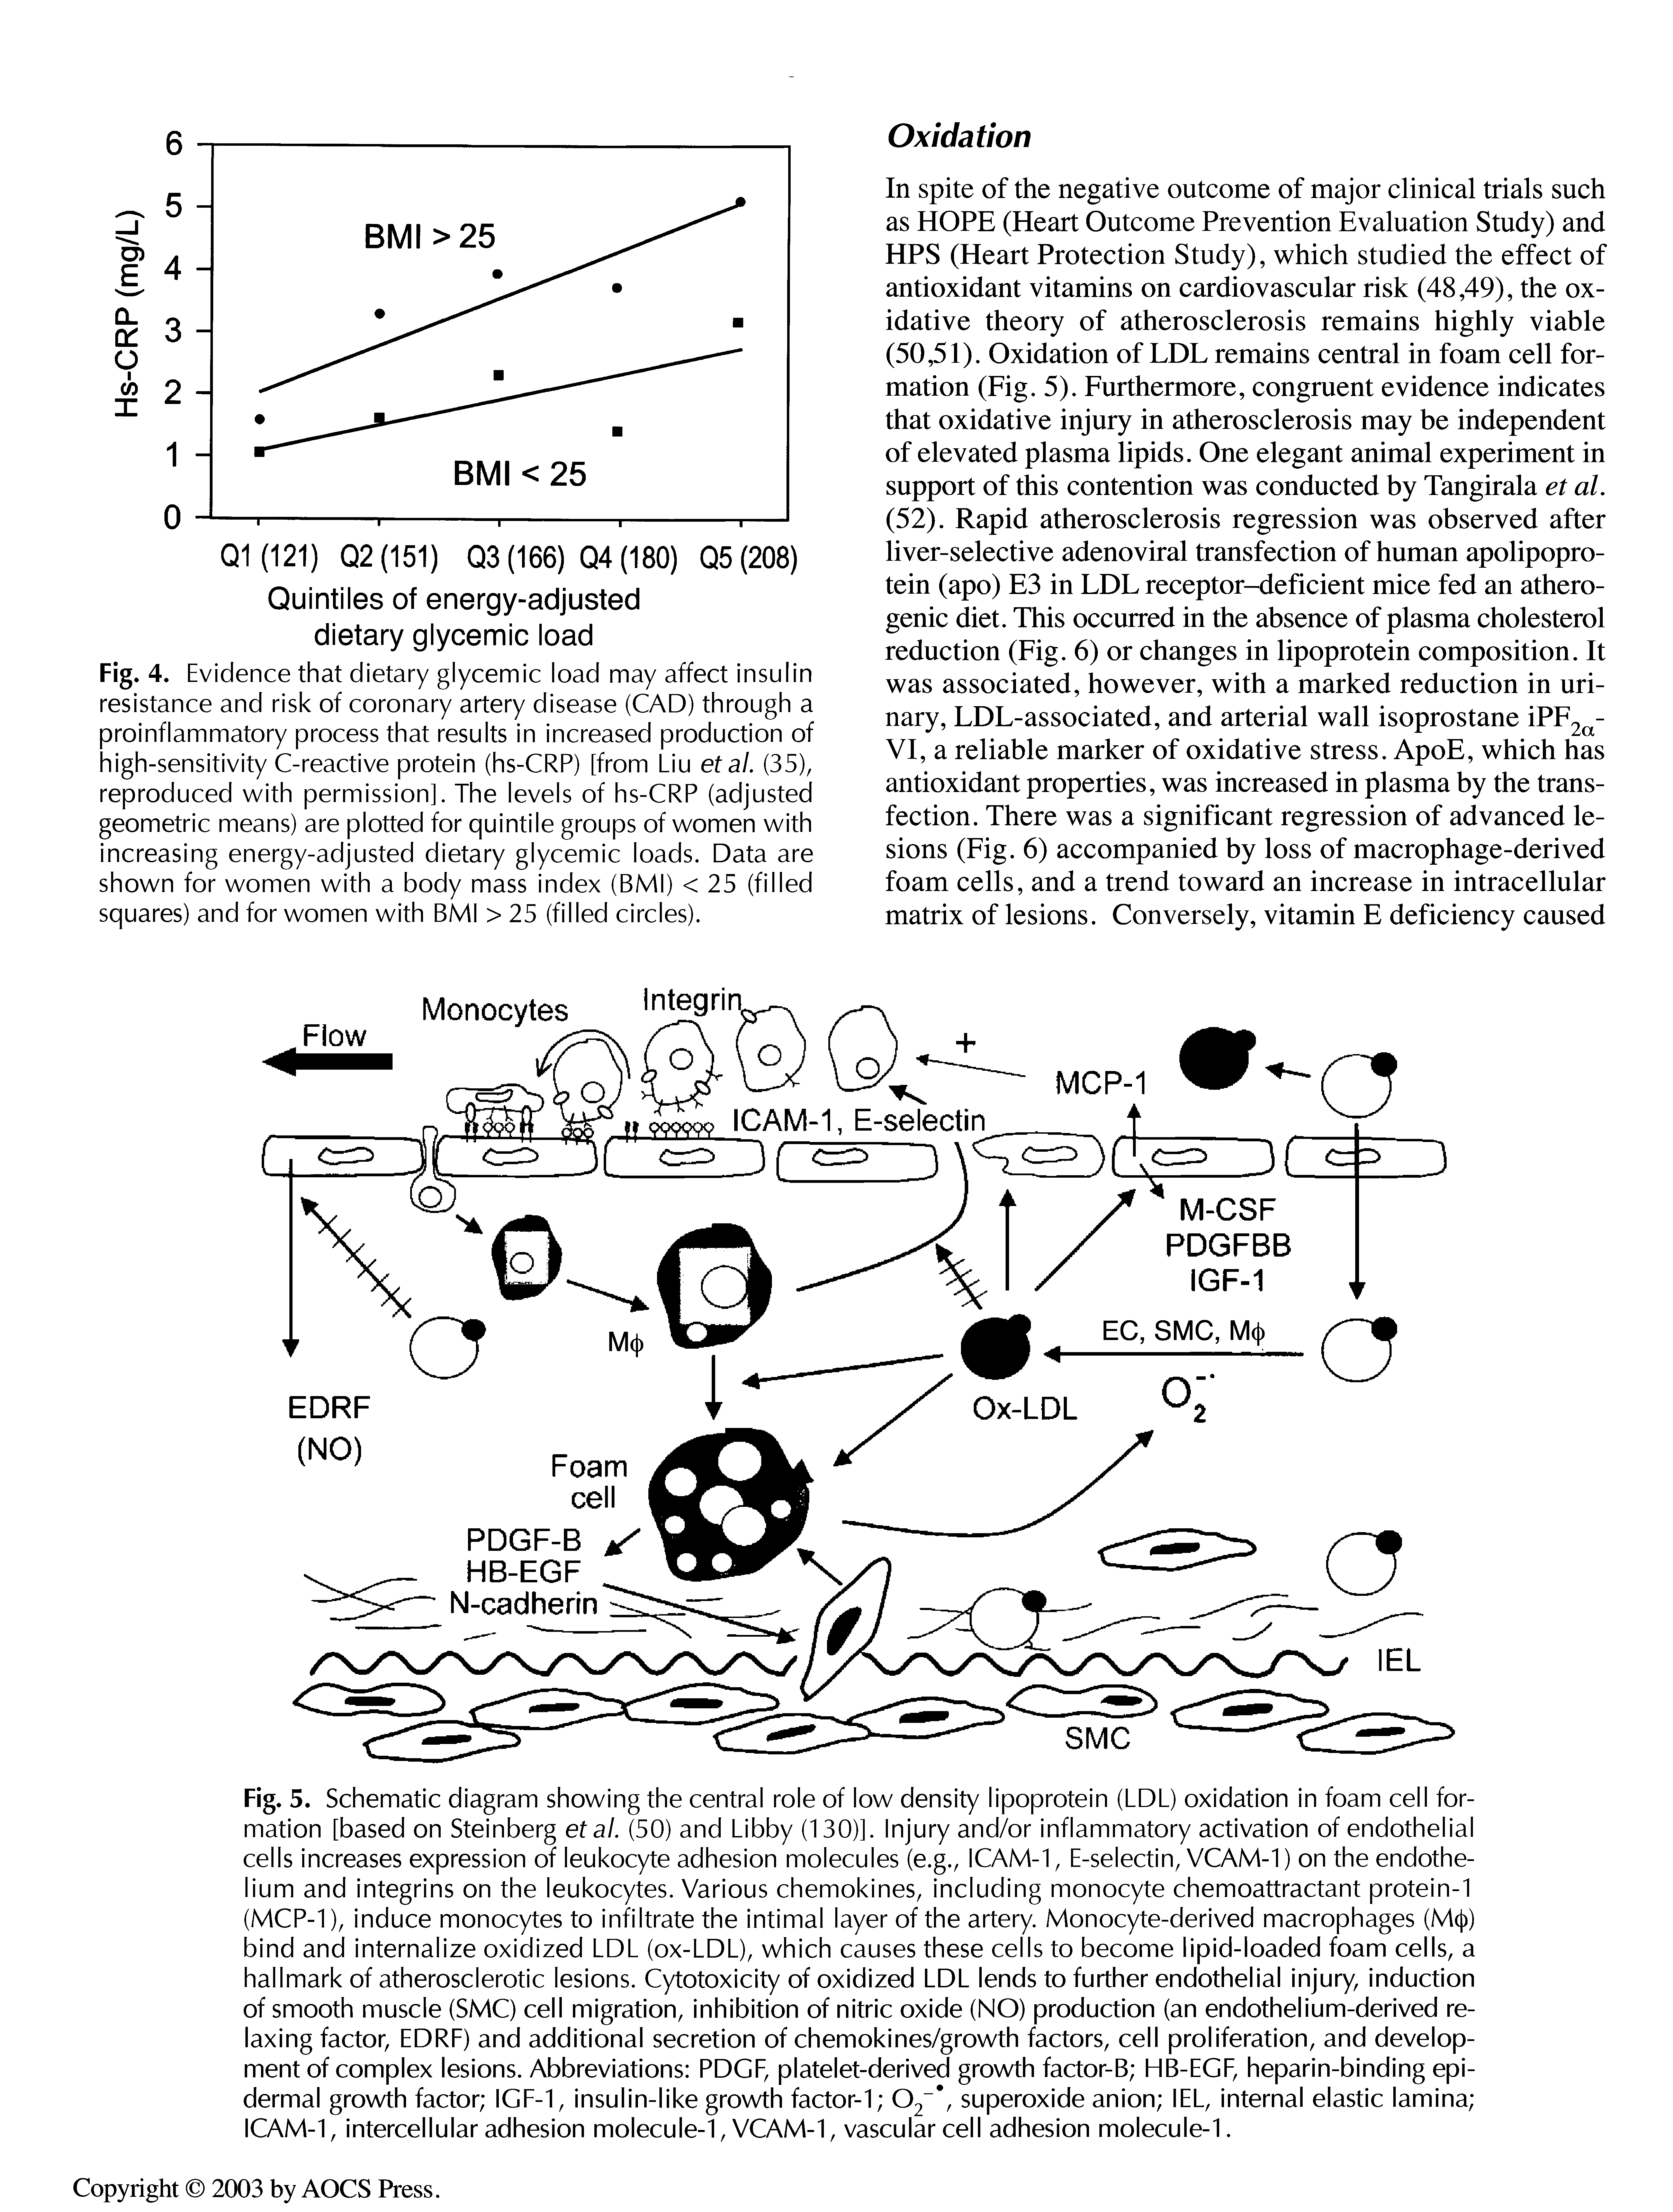 Fig. 4. Evidence that dietary glycemic load may affect insulin resistance and risk of coronary artery disease (CAD) through a proinflammatory process that results in increased production of high-sensitivity C-reactive protein (hs-CRP) [from Liu etal. (35), reproduced with permission]. The levels of hs-CRP (adjusted geometric means) are plotted for quintile groups of women with increasing energy-adjusted dietary glycemic loads. Data are shown for women with a body mass index (BMI) < 25 (filled squares) and for women with BMI > 25 (filled circles).